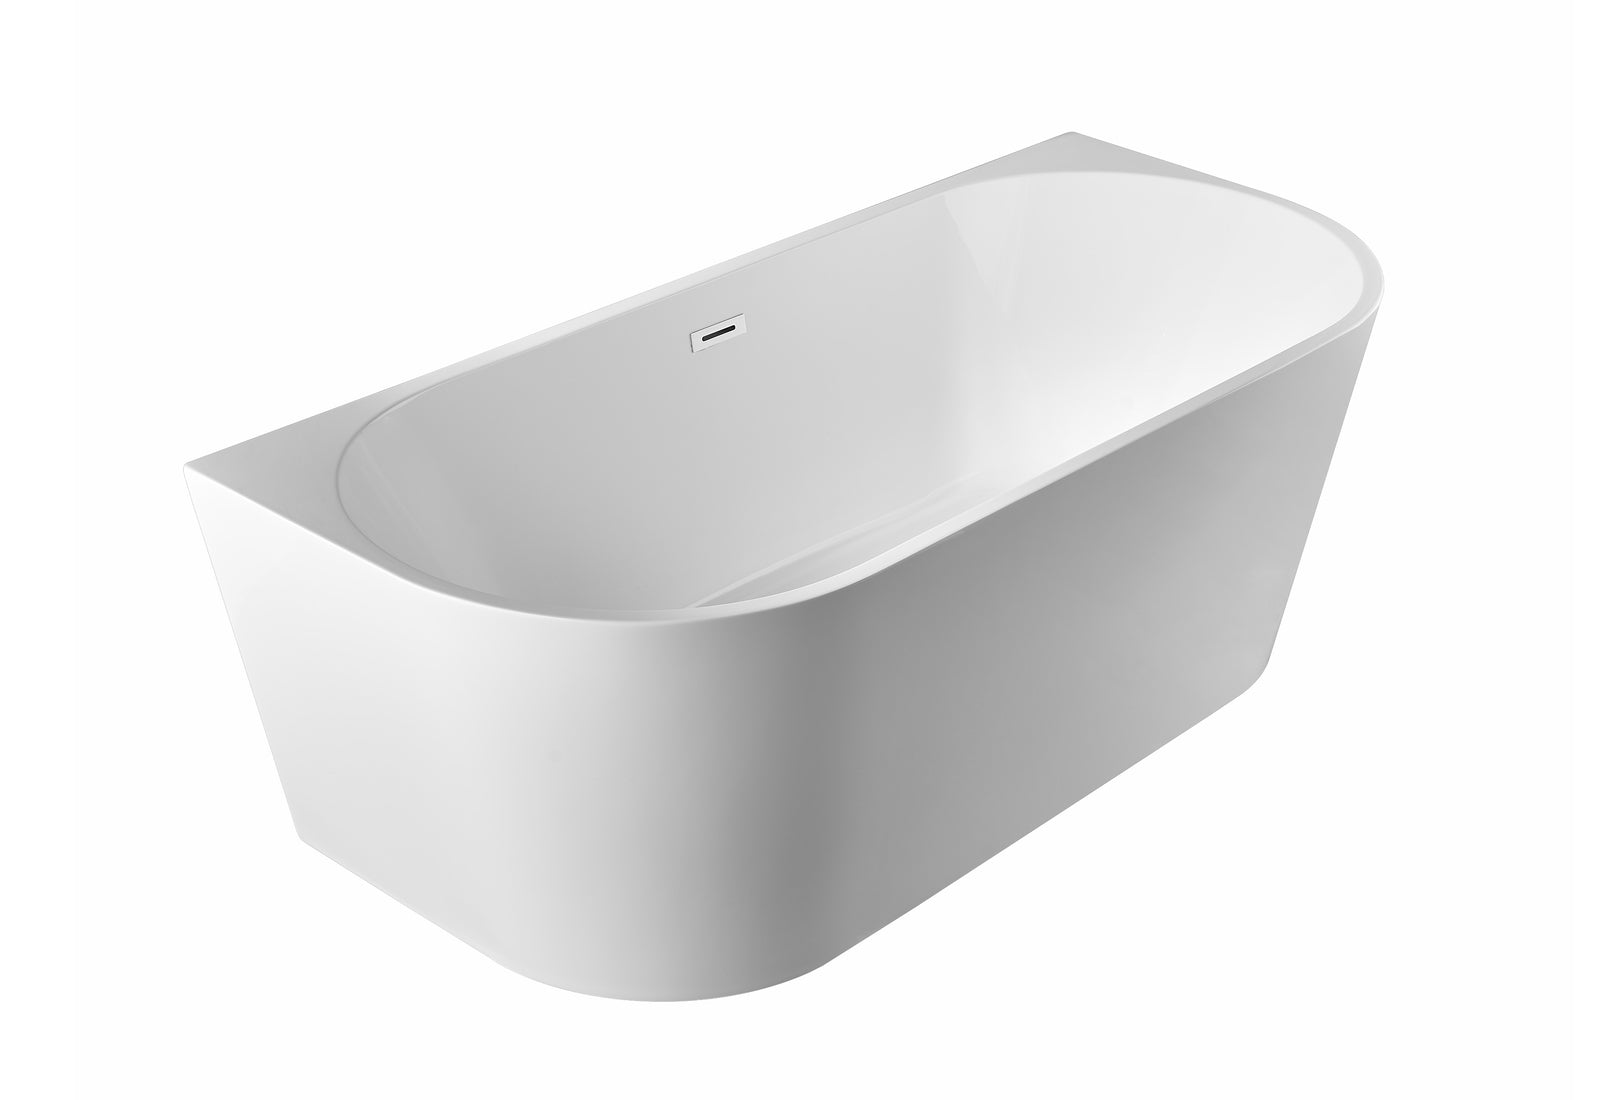 Melbourne Local Pick Up Back to wall Thin edge Japanese Acrylic Free Standing BathTub with Overflow 1495x750 x580